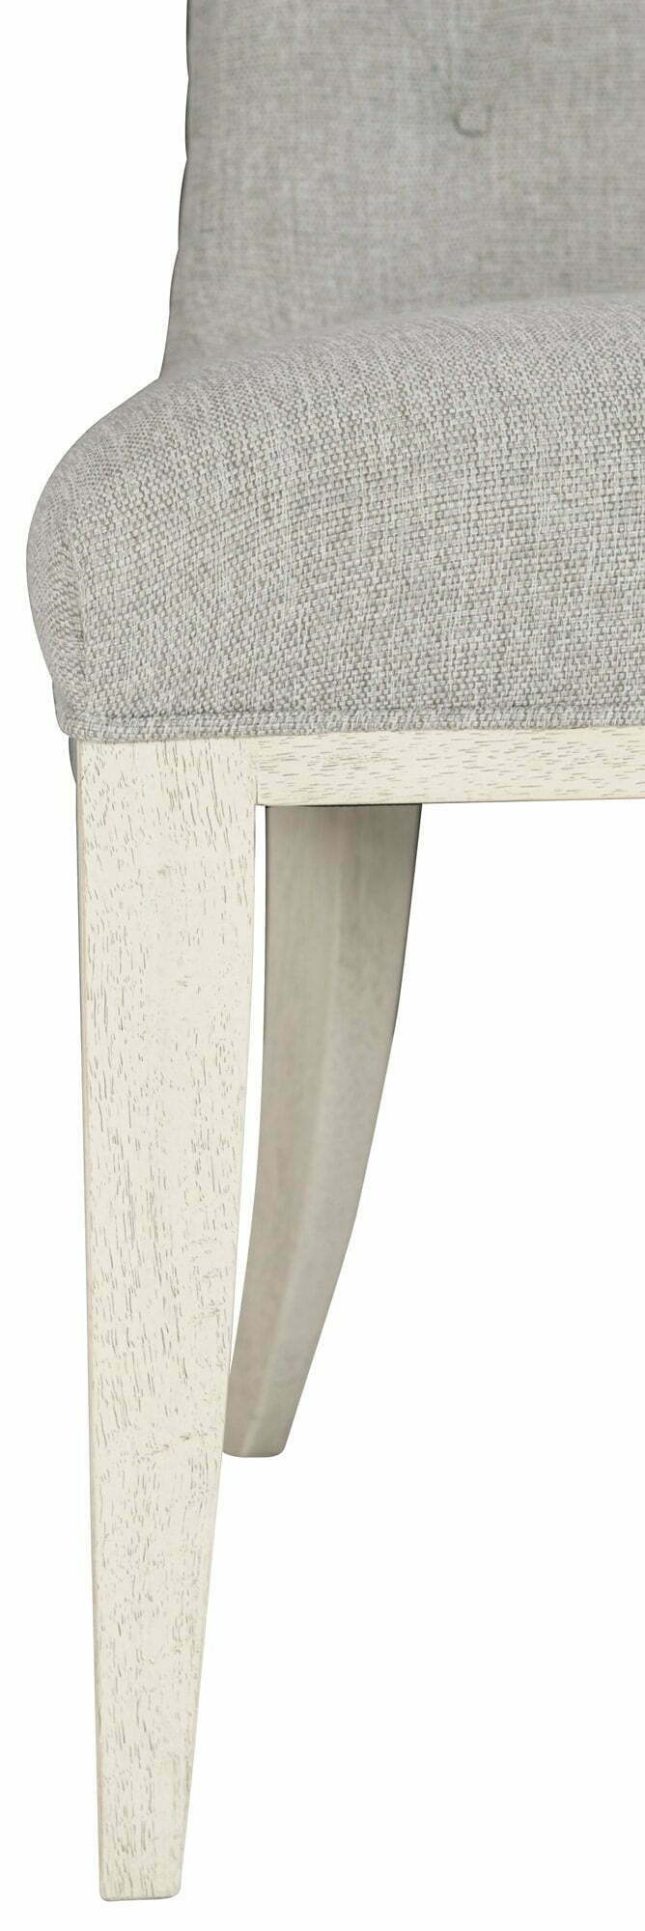 Allure Upholstered Dining Chair Details